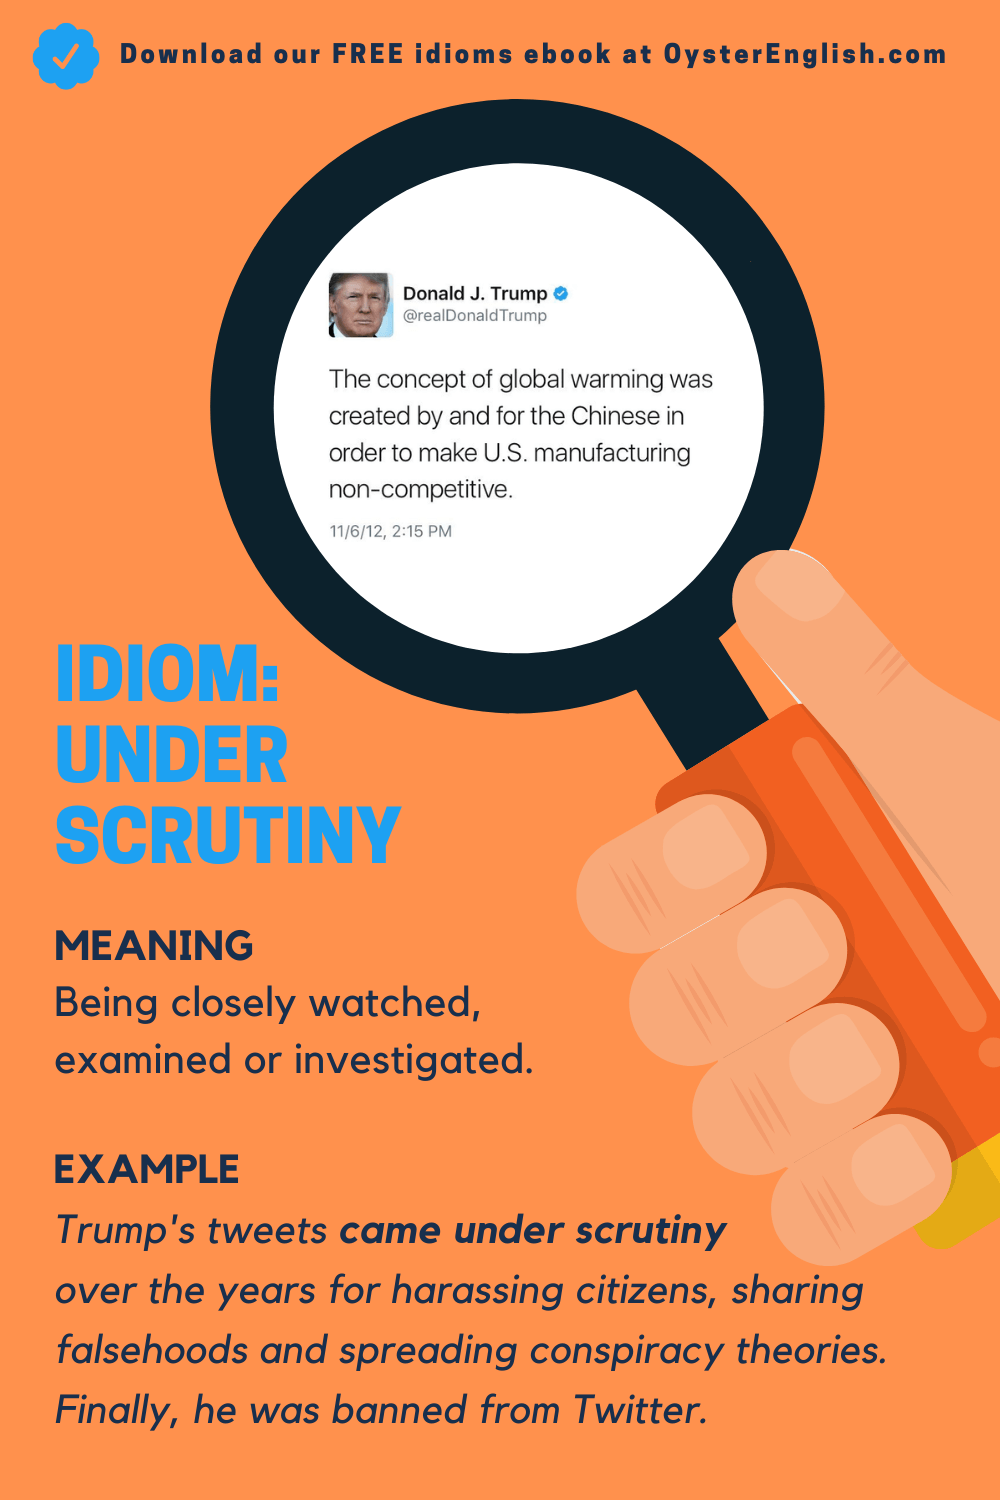 Idiom: Under scrutiny (meaning & examples)